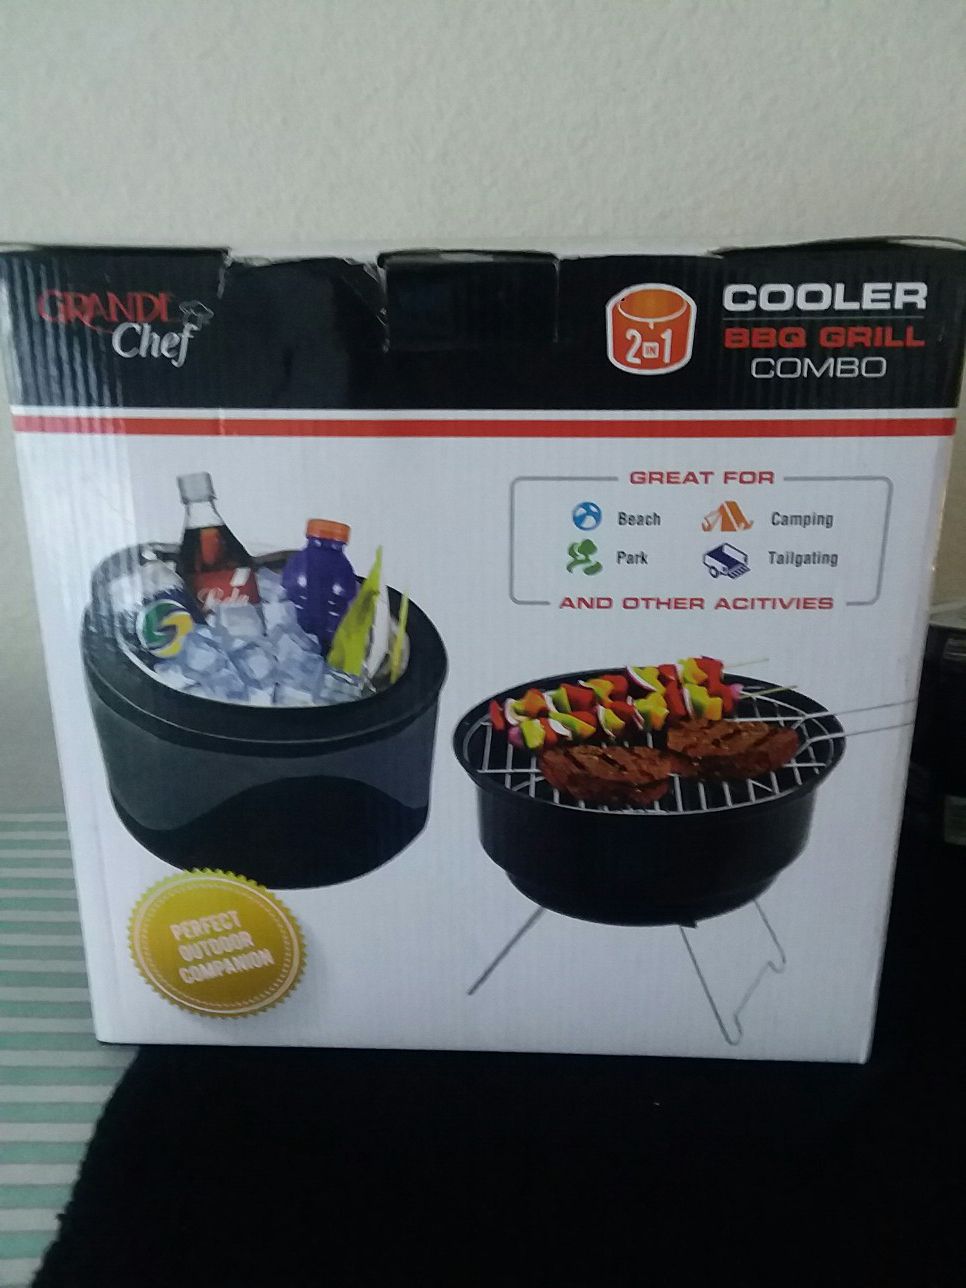 Cooler BBQ Grill Combo